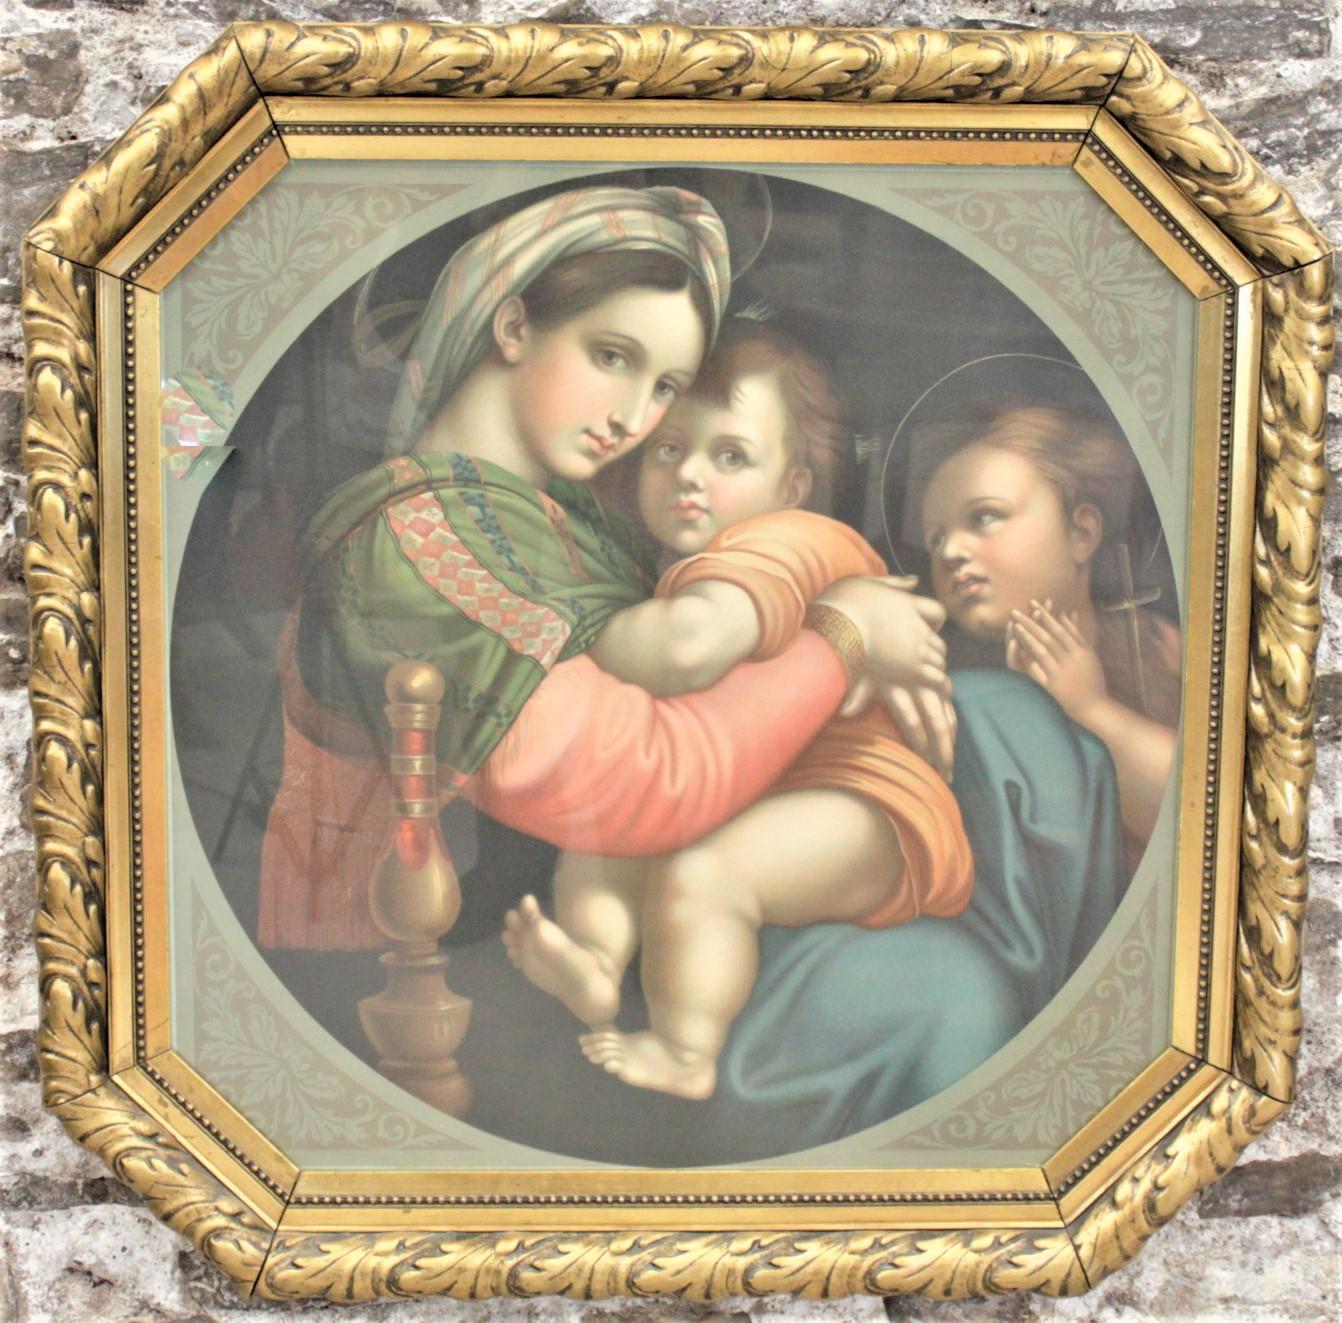 This very large chrome lithographed print is unsigned, but presumed to have originated from Italy in circa 1930 in a Renaissance Revival style. The lithograph depicts a rendition of the Adoration of the Magi and is matted with scrolled accents on